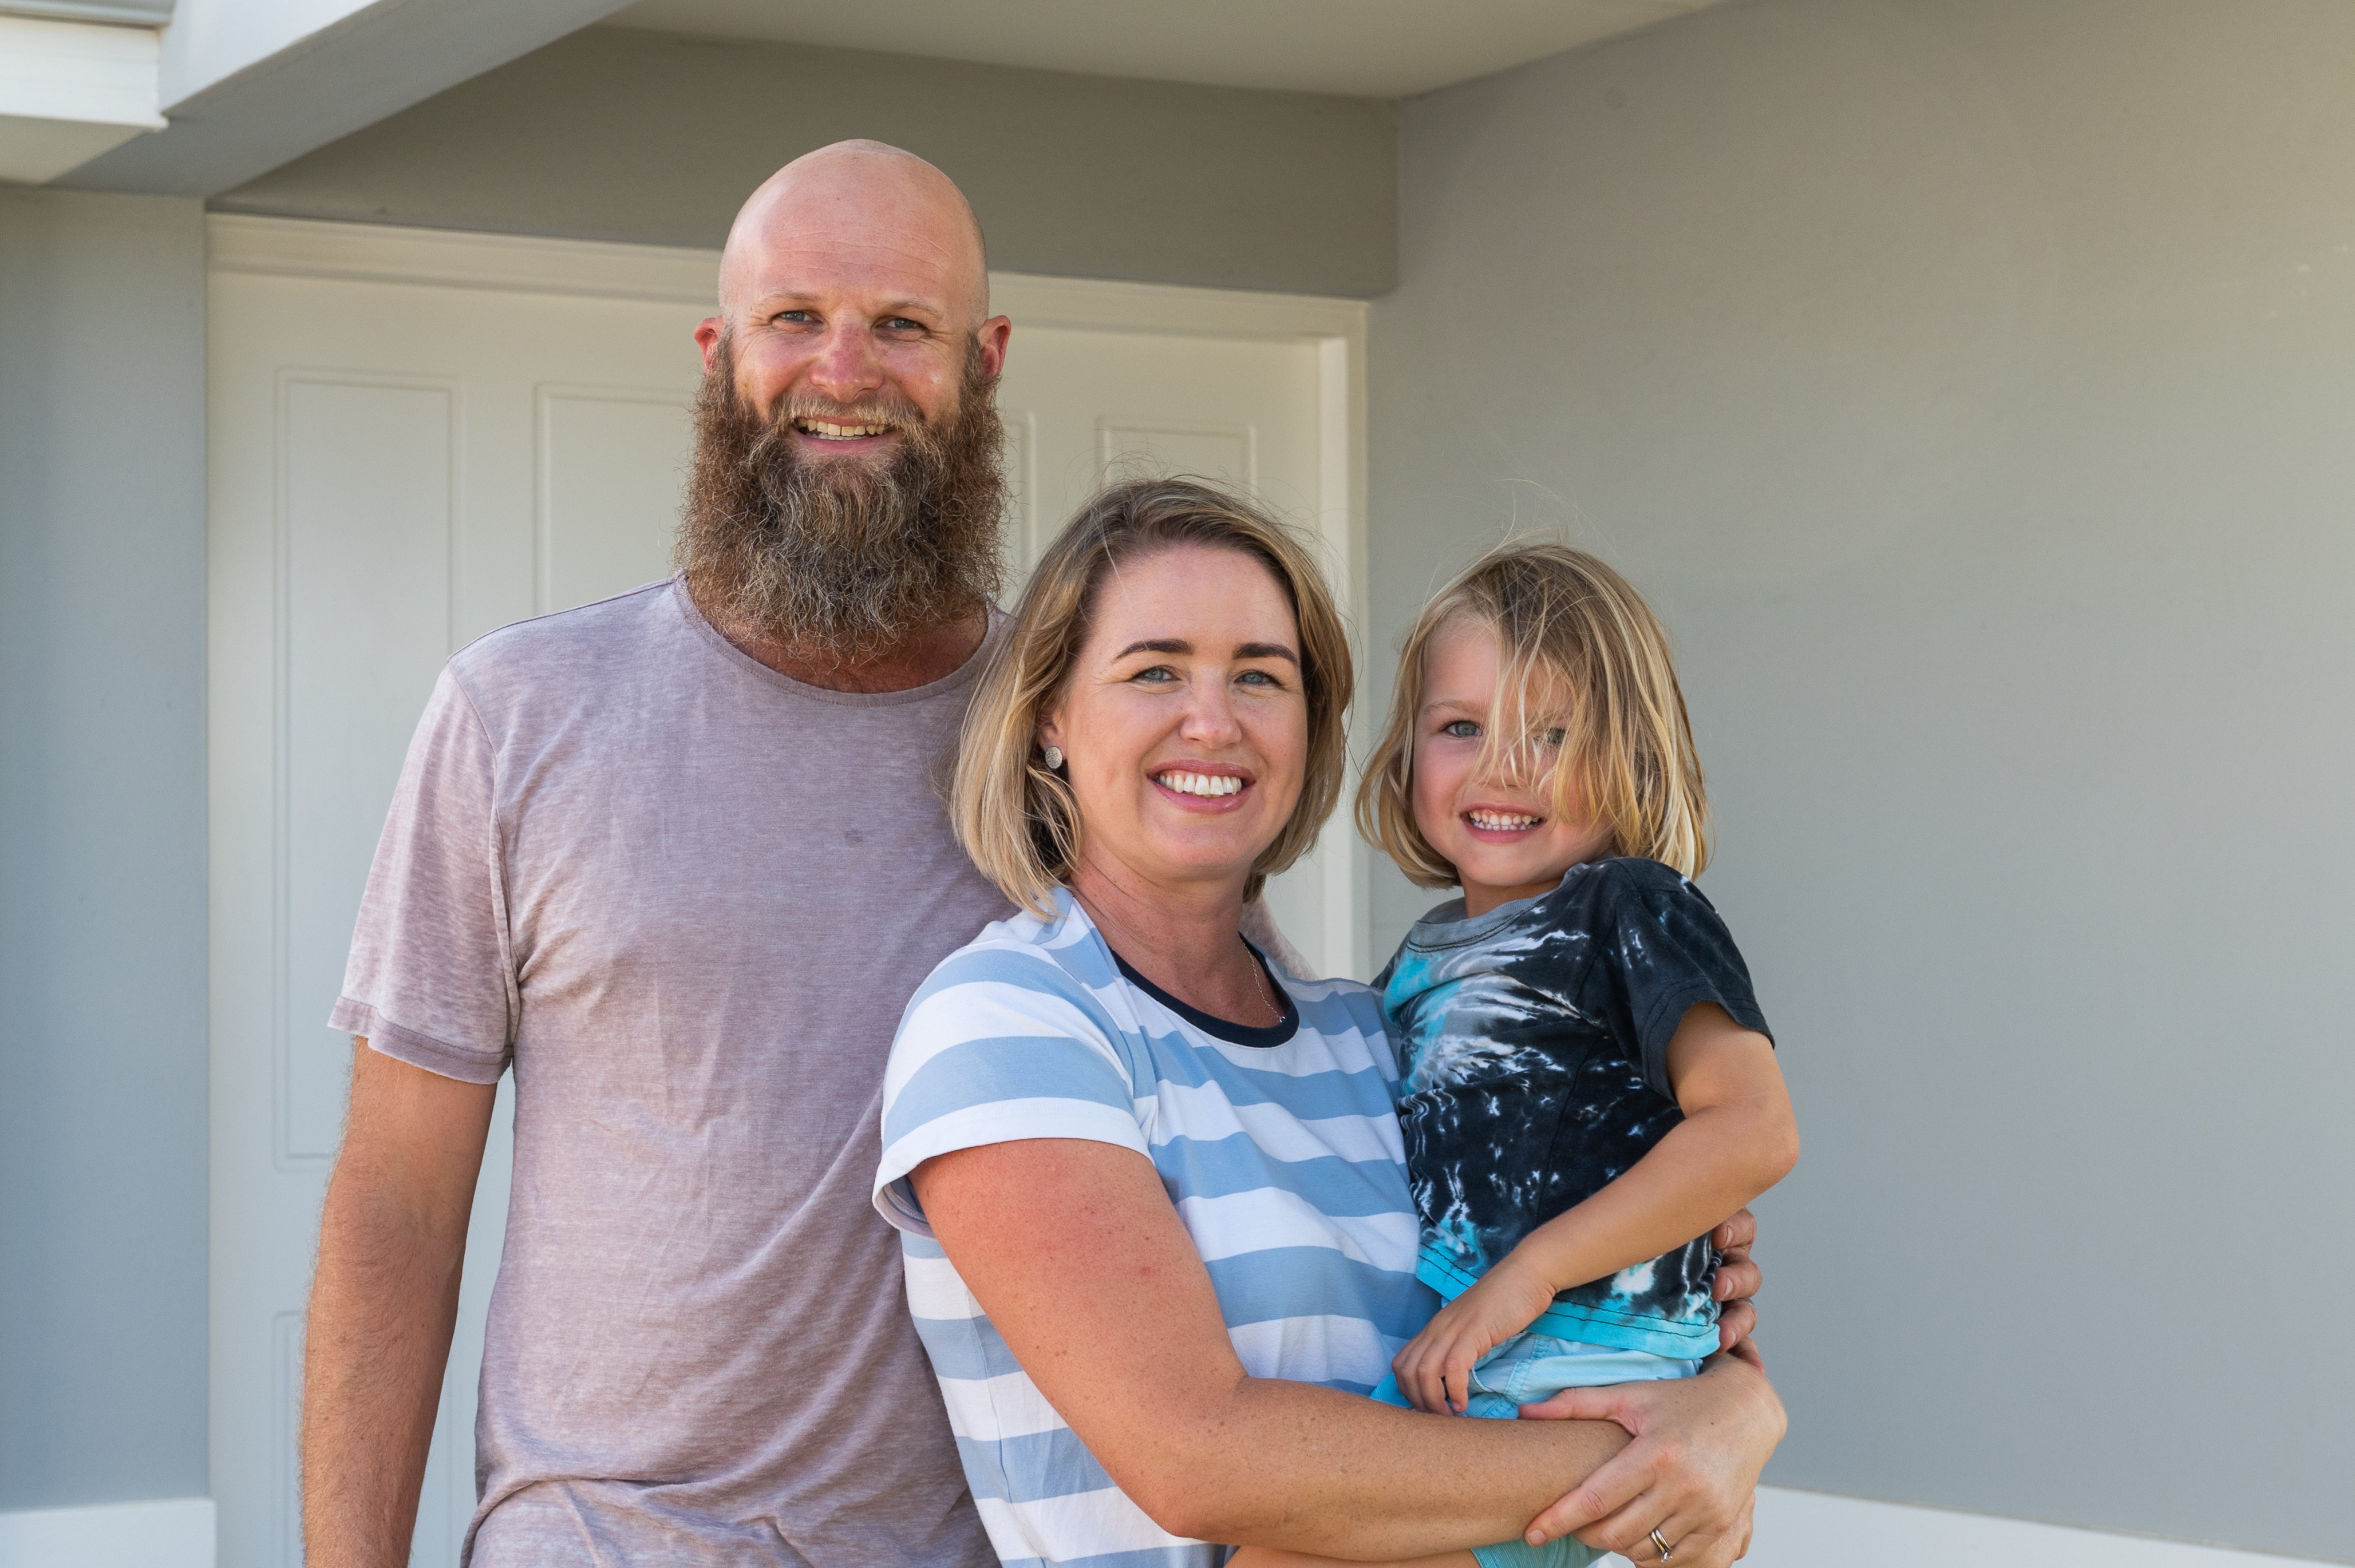 Smiling bearded bald man next to smiling blonde woman holding smiling blonde child in front of white front door. 